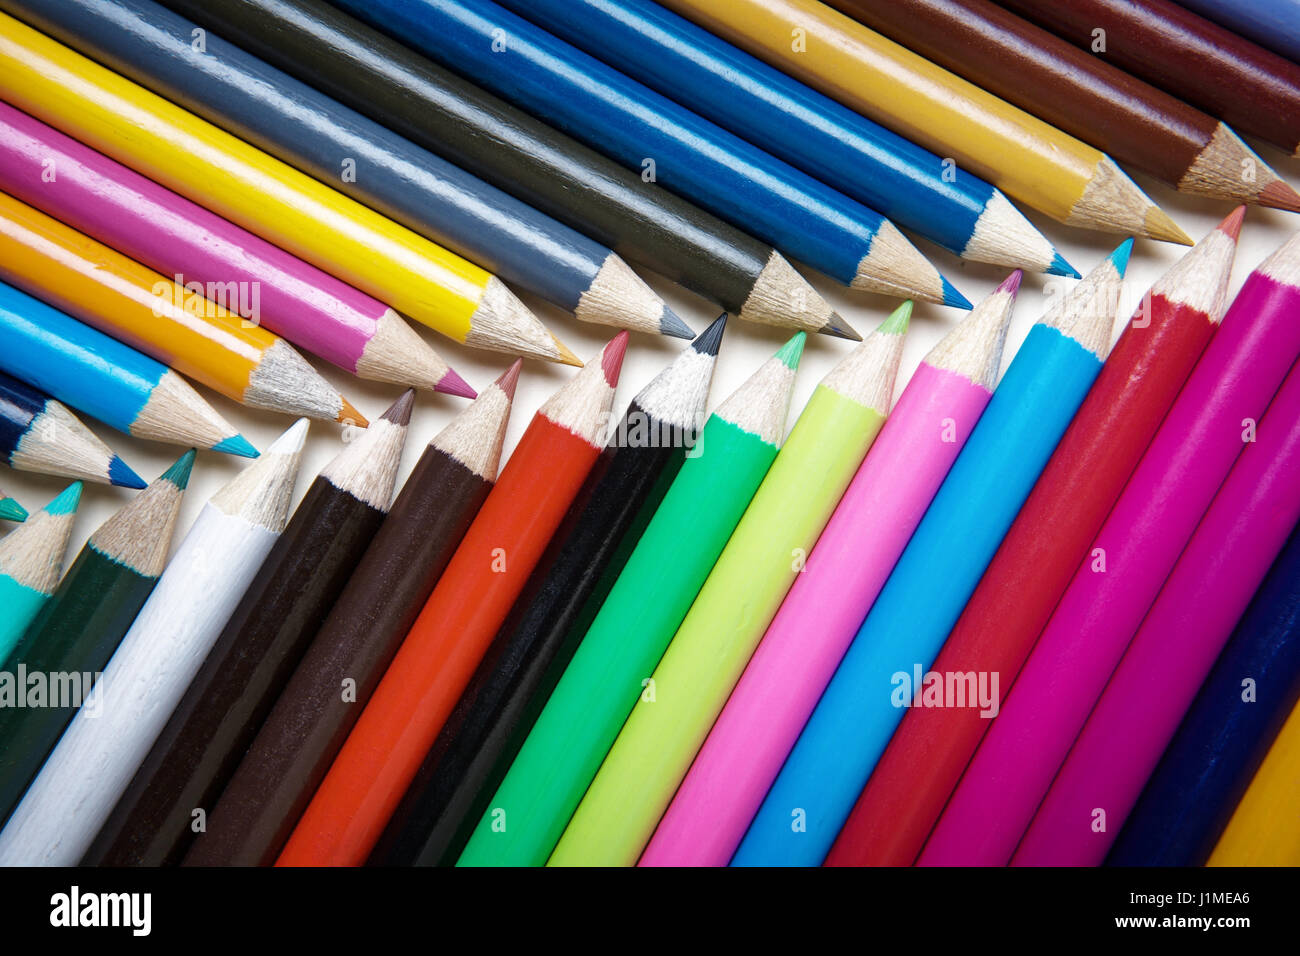 lots of colored pencils on white paper background image to add your own text if you want Stock Photo